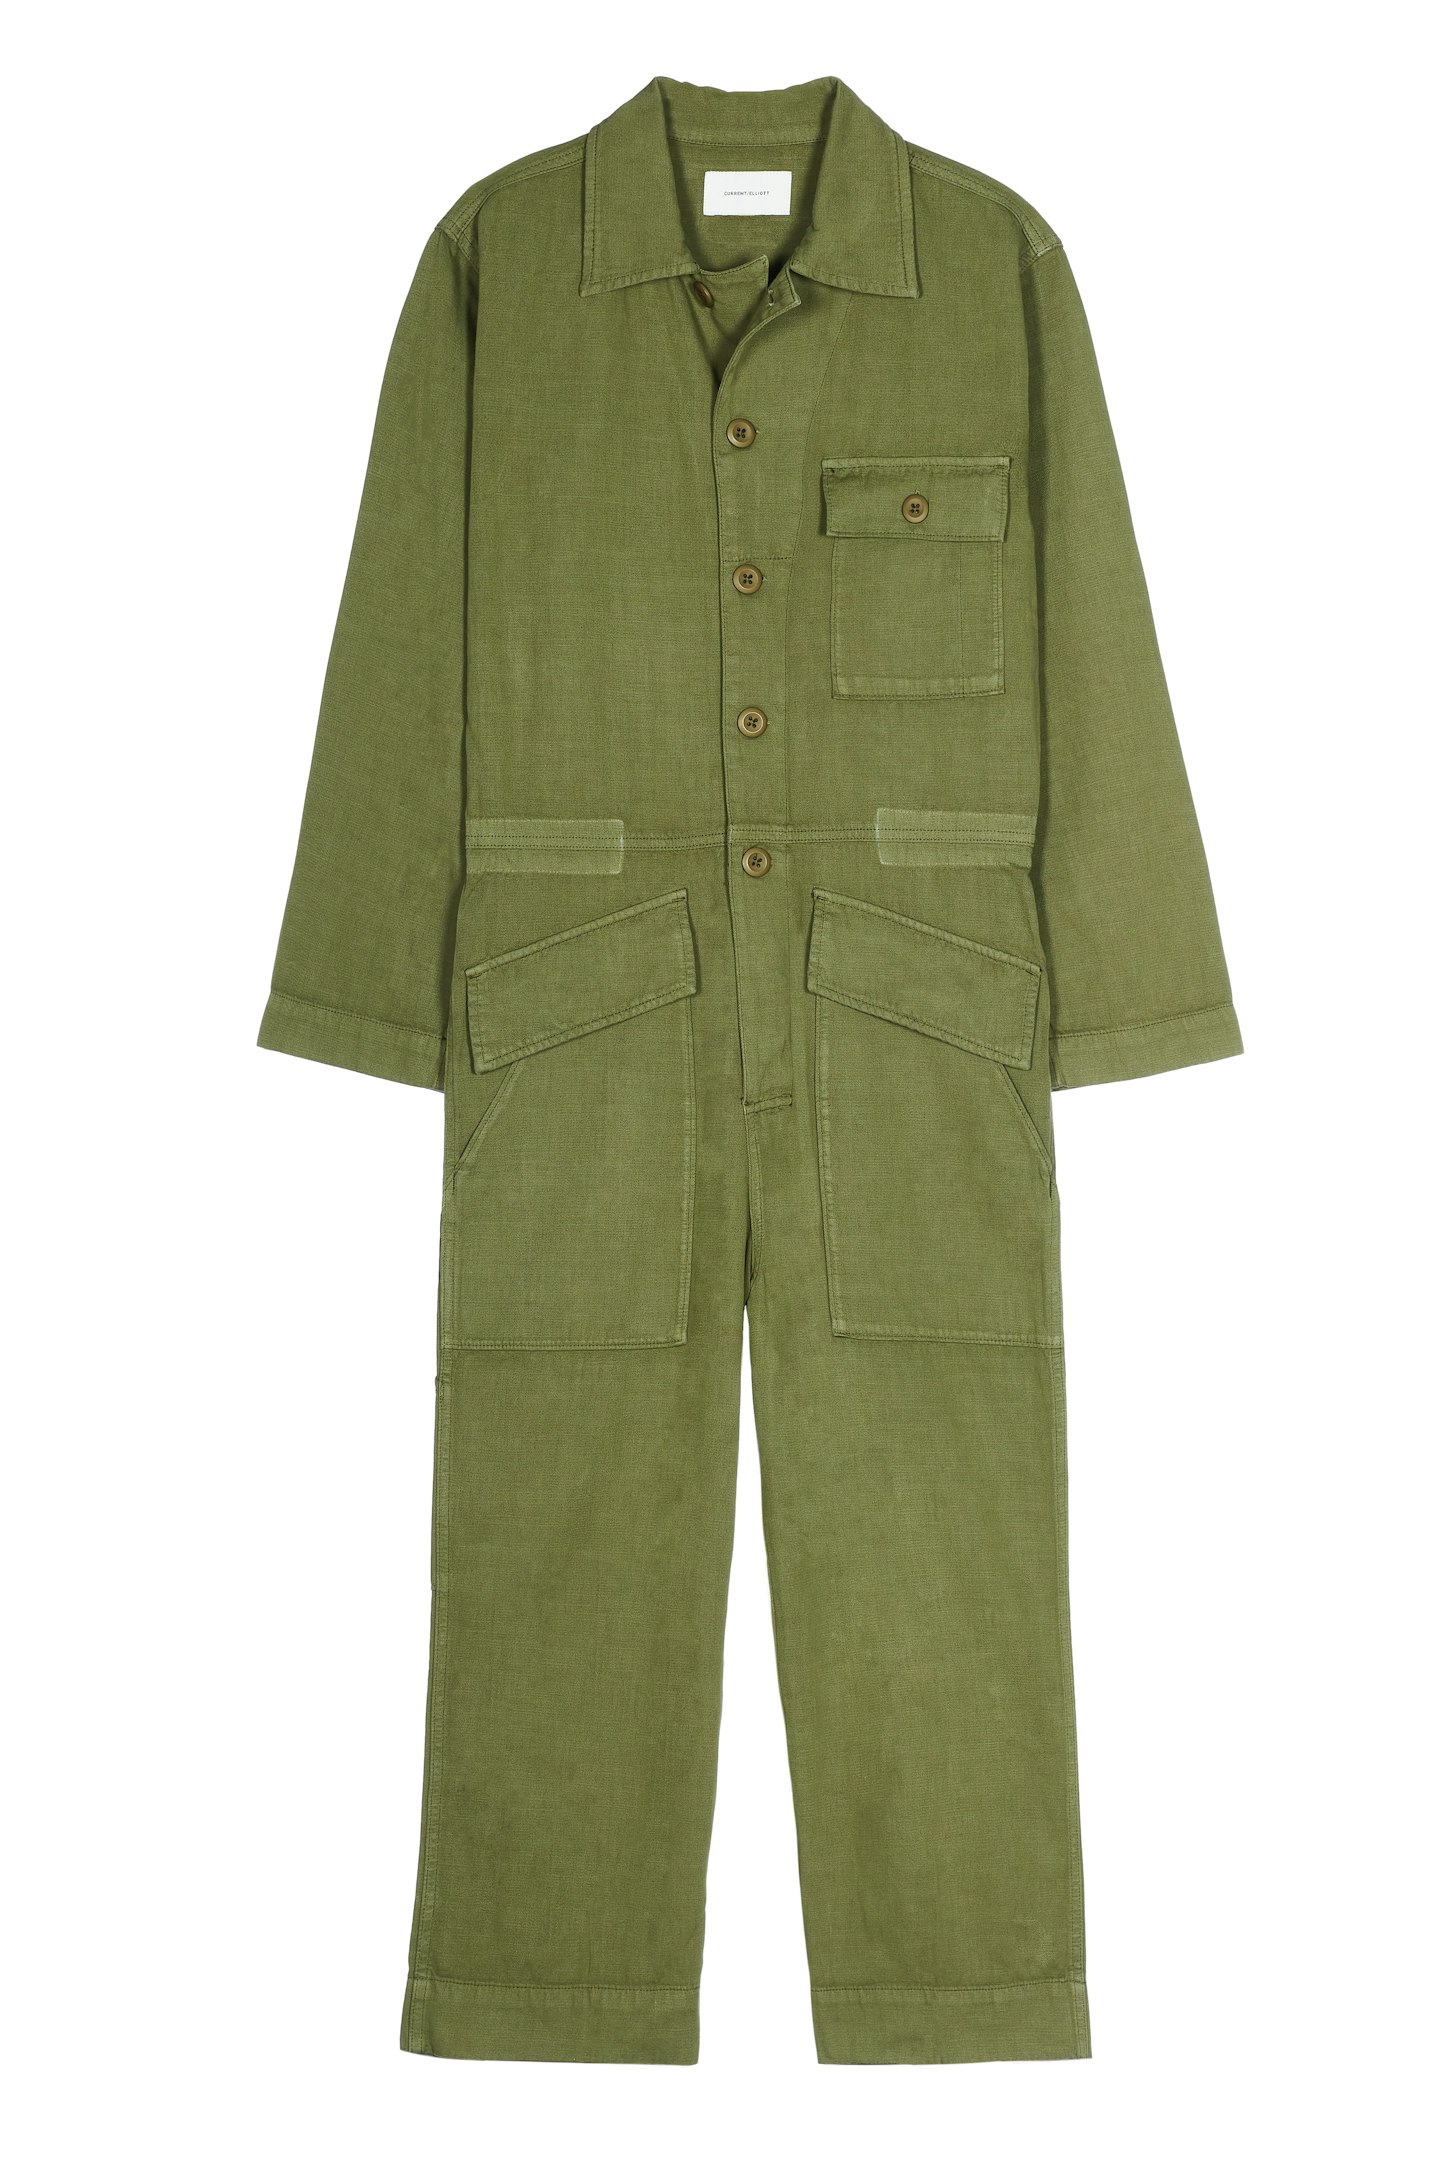 The Boiler Suit's Here To Stay